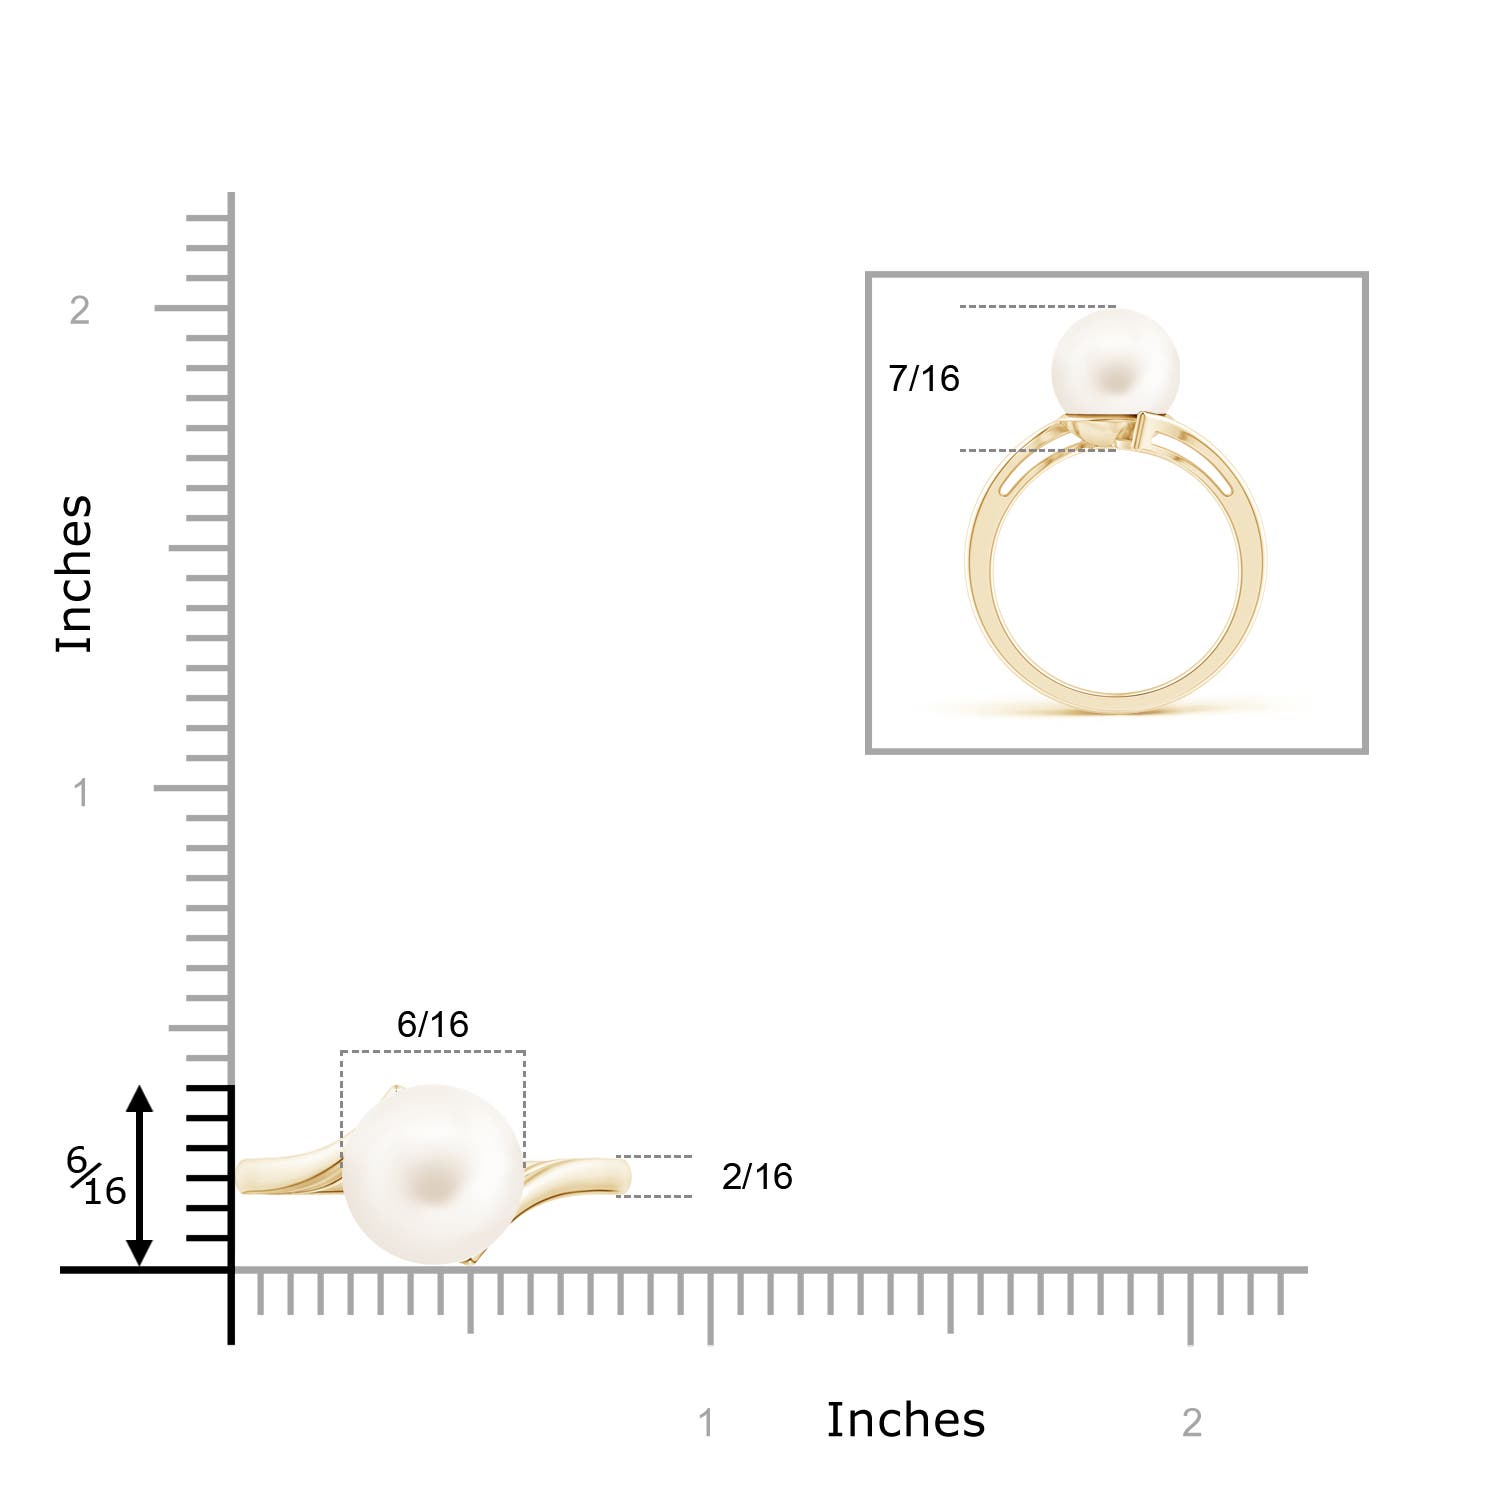 AA / 7.2 CT / 14 KT Yellow Gold